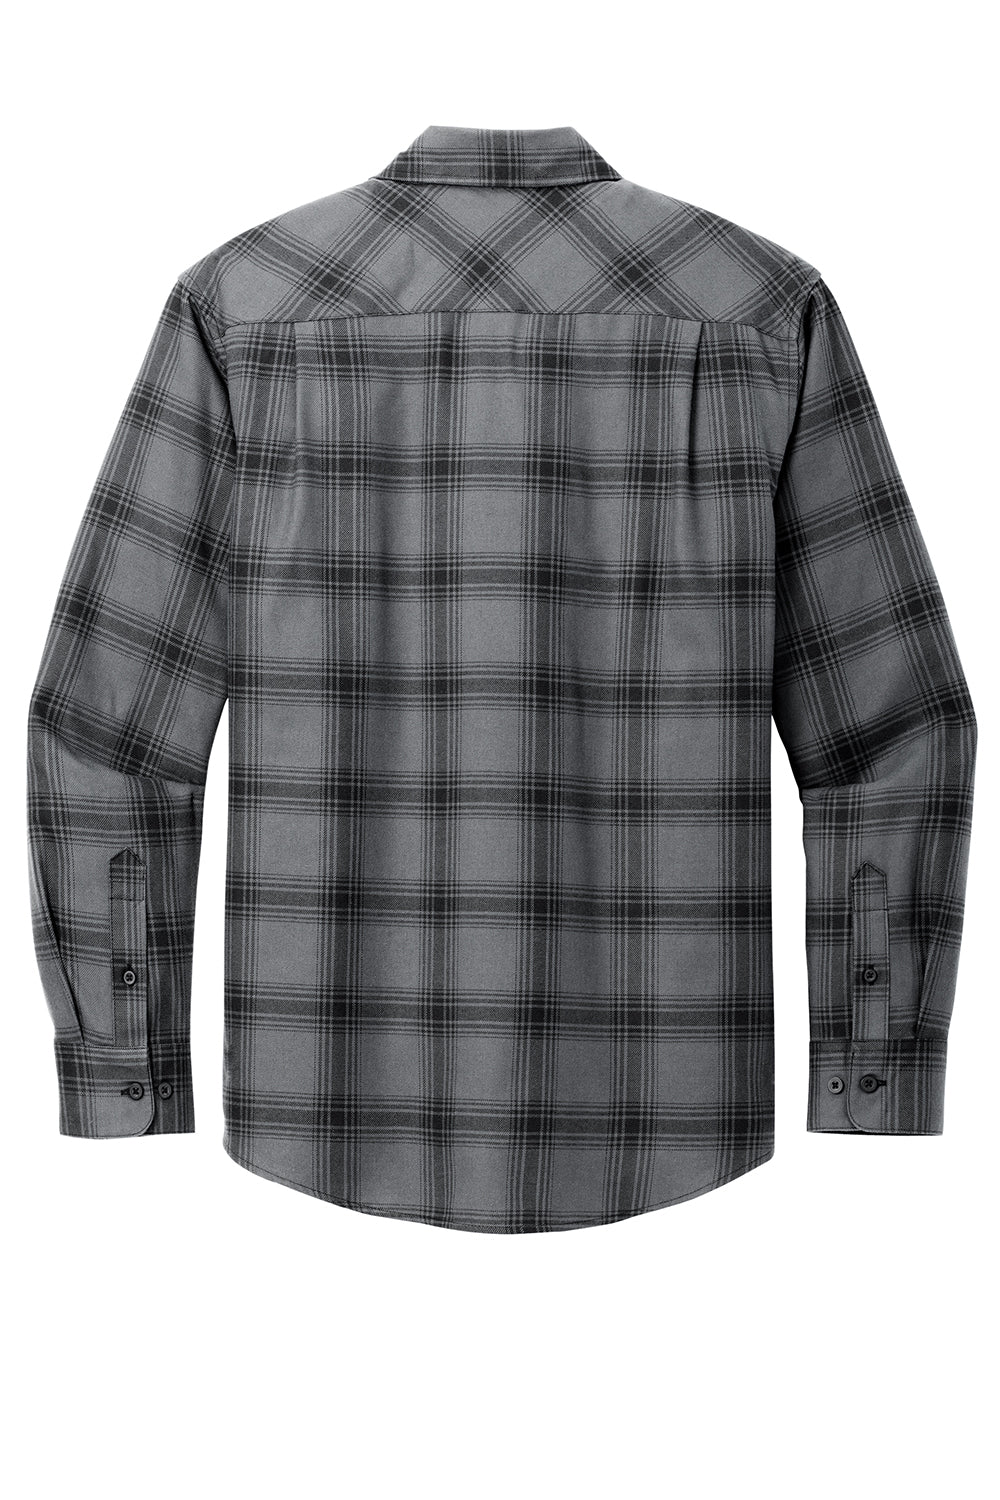 Port Authority W668 Mens Flannel Long Sleeve Button Down Shirt w/ Double Pockets Grey/Black Plaid Flat Back